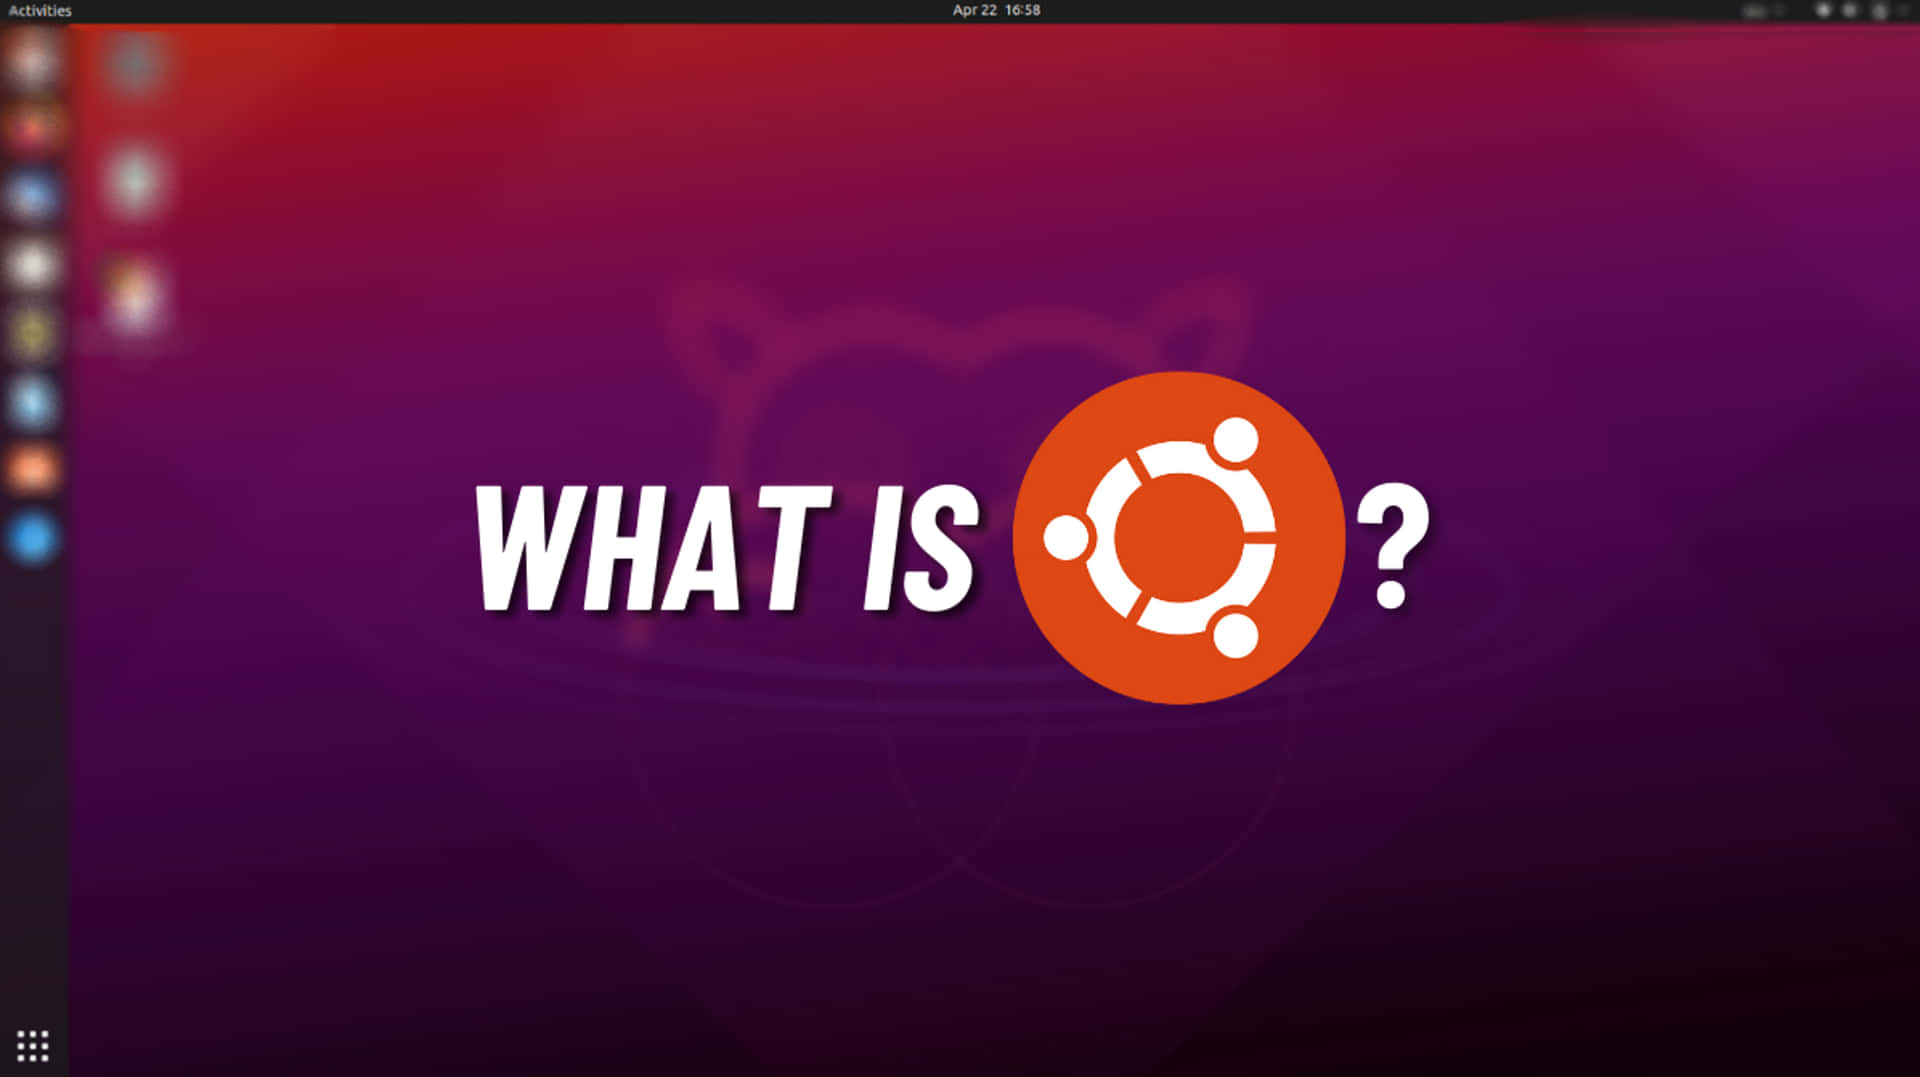 Welcome to Ubuntu, Your Operating System